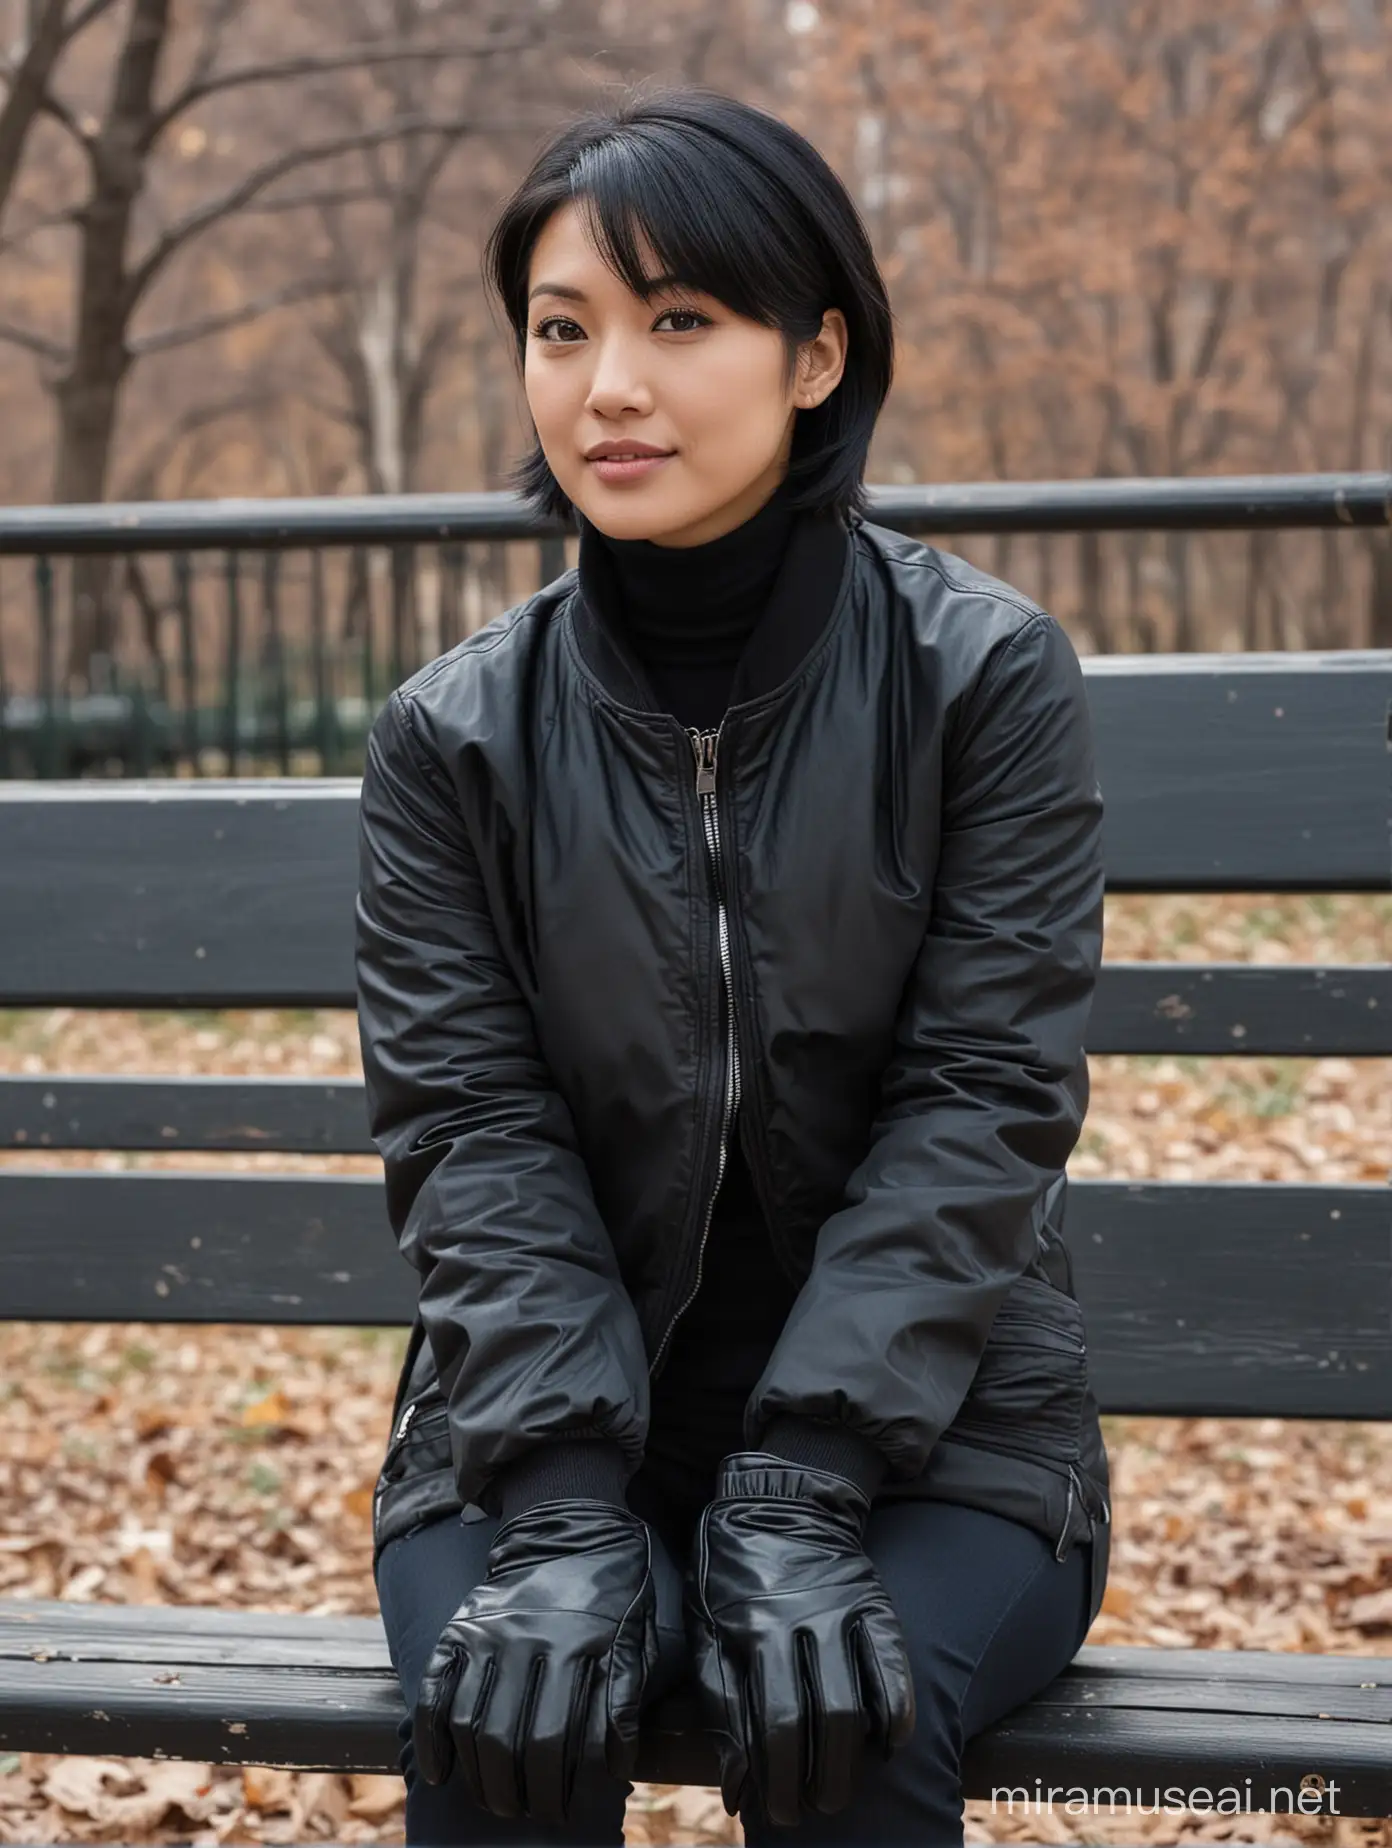 Asian- american woman, medium short black hair, black bomber jacket, black turtleneck, black gloves, jeans,sit on a bench,in a new York park,in the winter